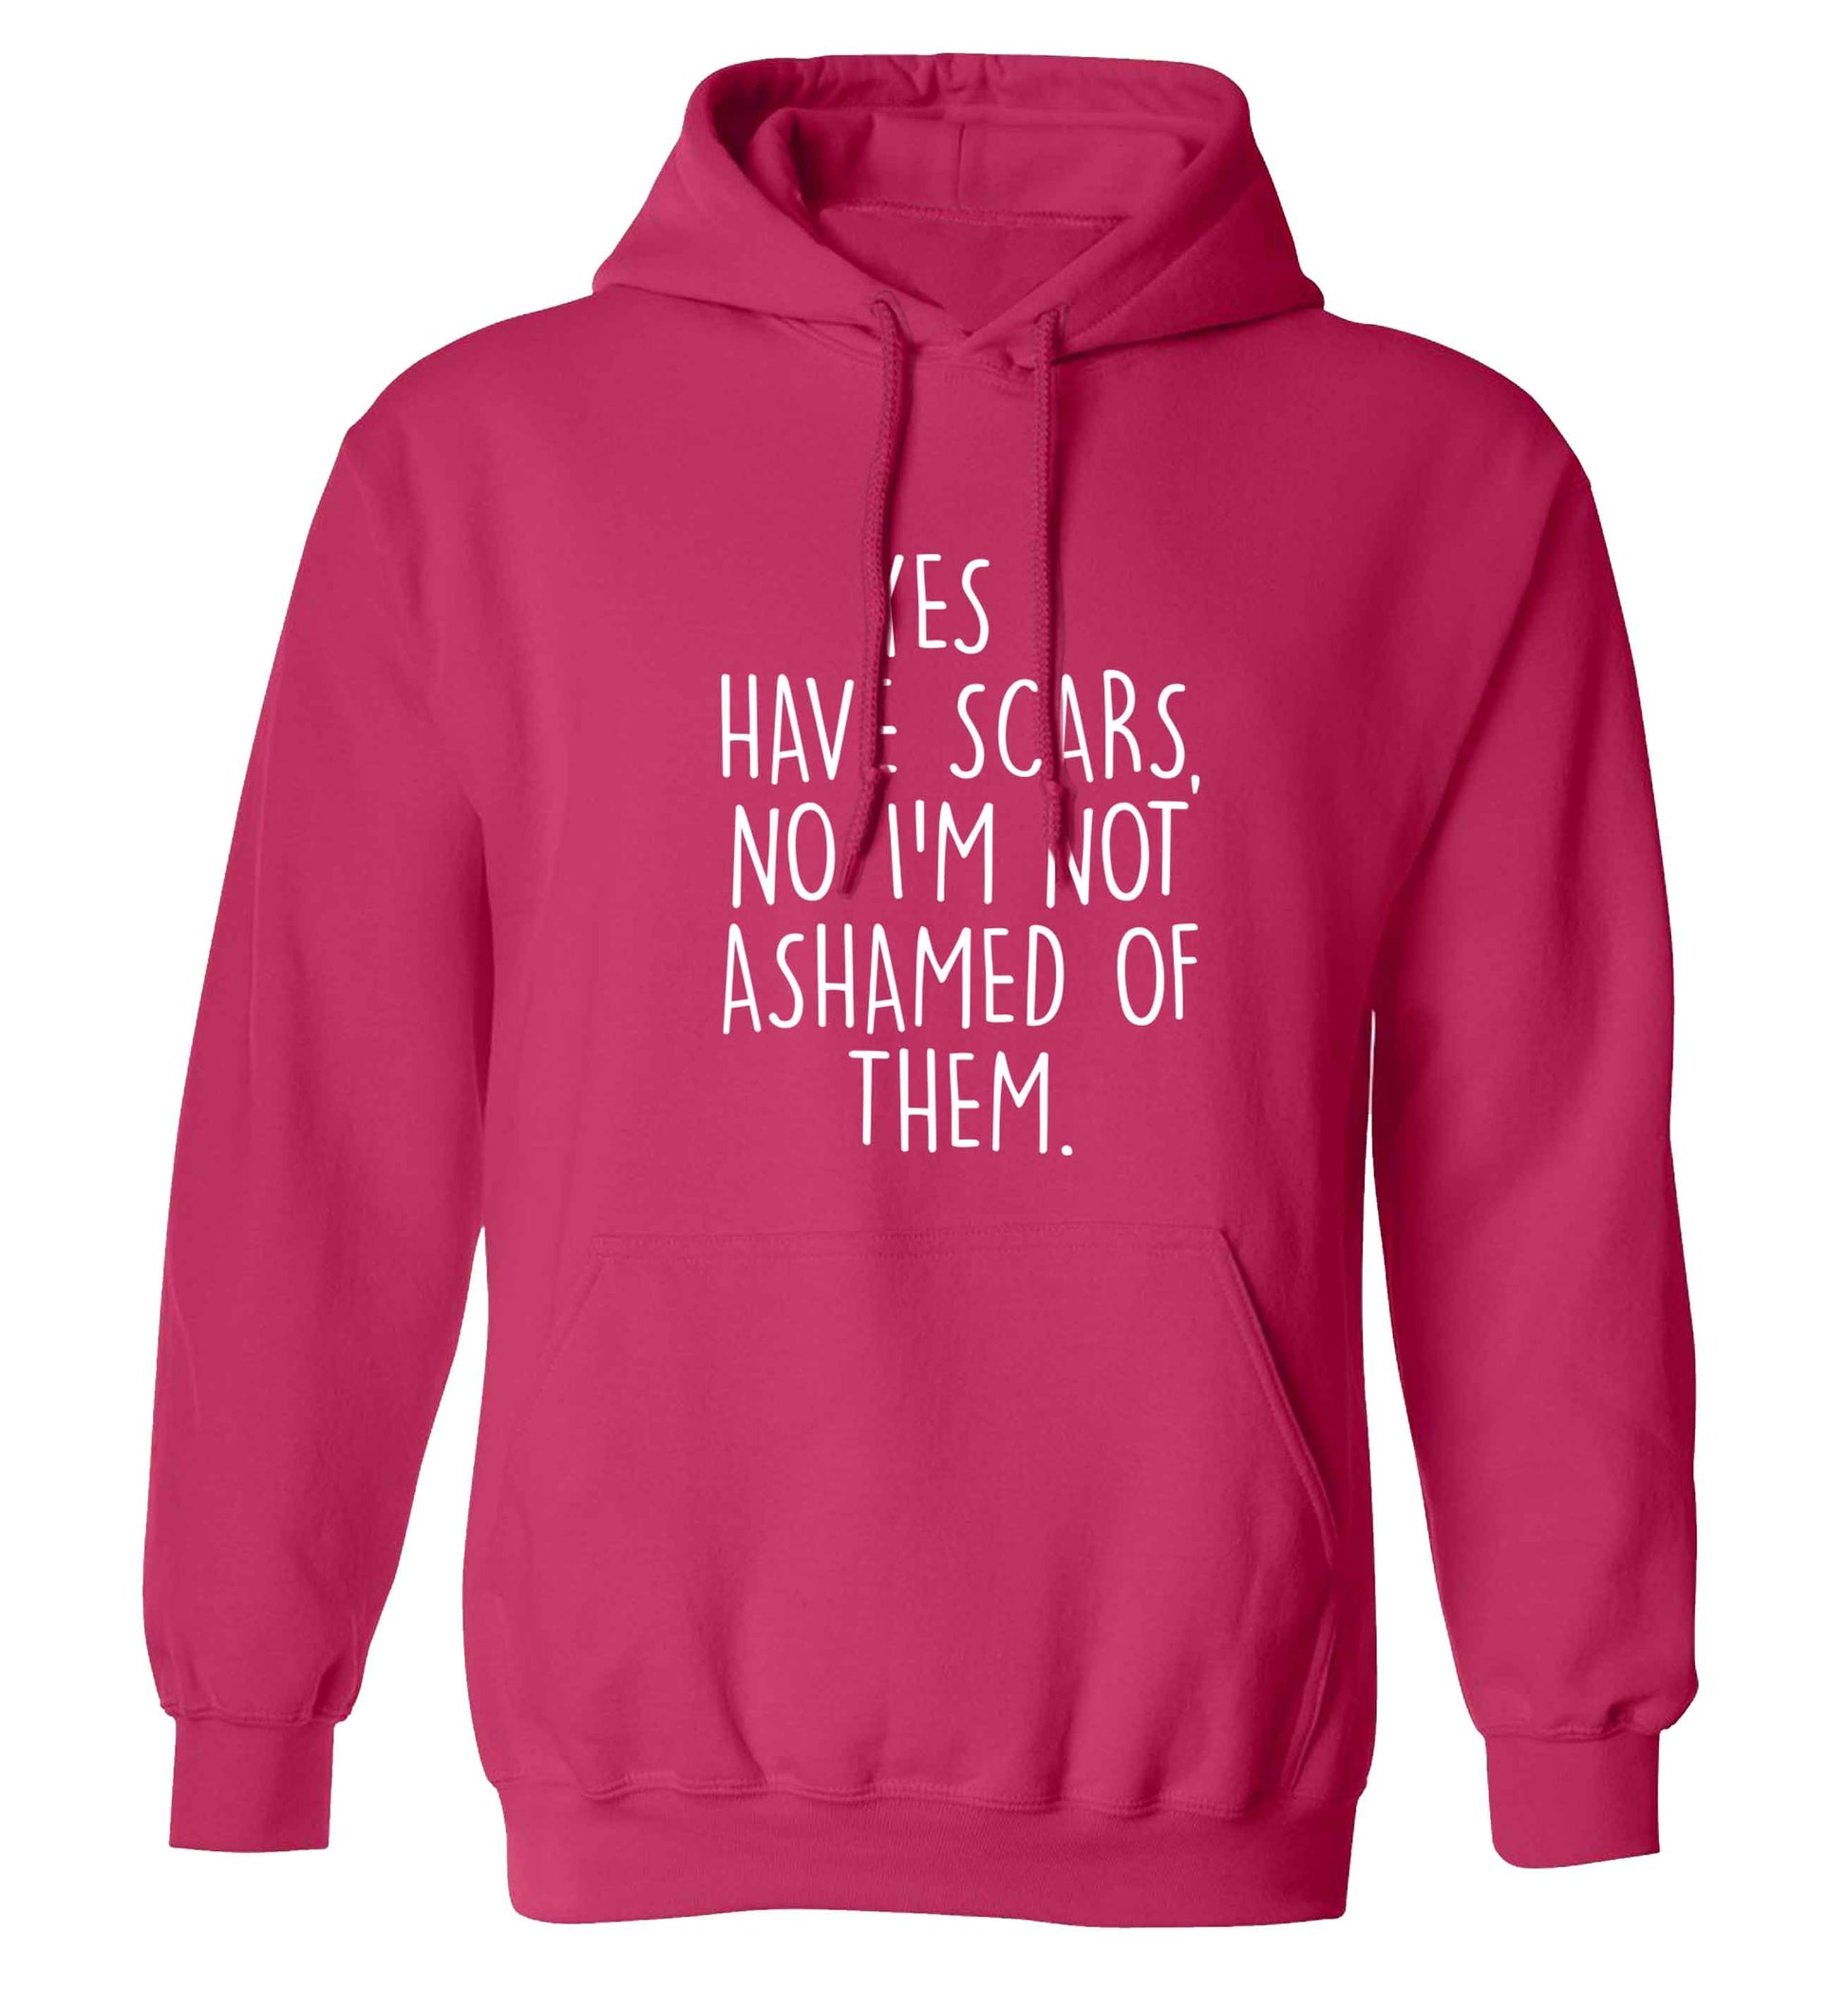 Yes I have scars, no I'm not ashamed of them adults unisex pink hoodie 2XL